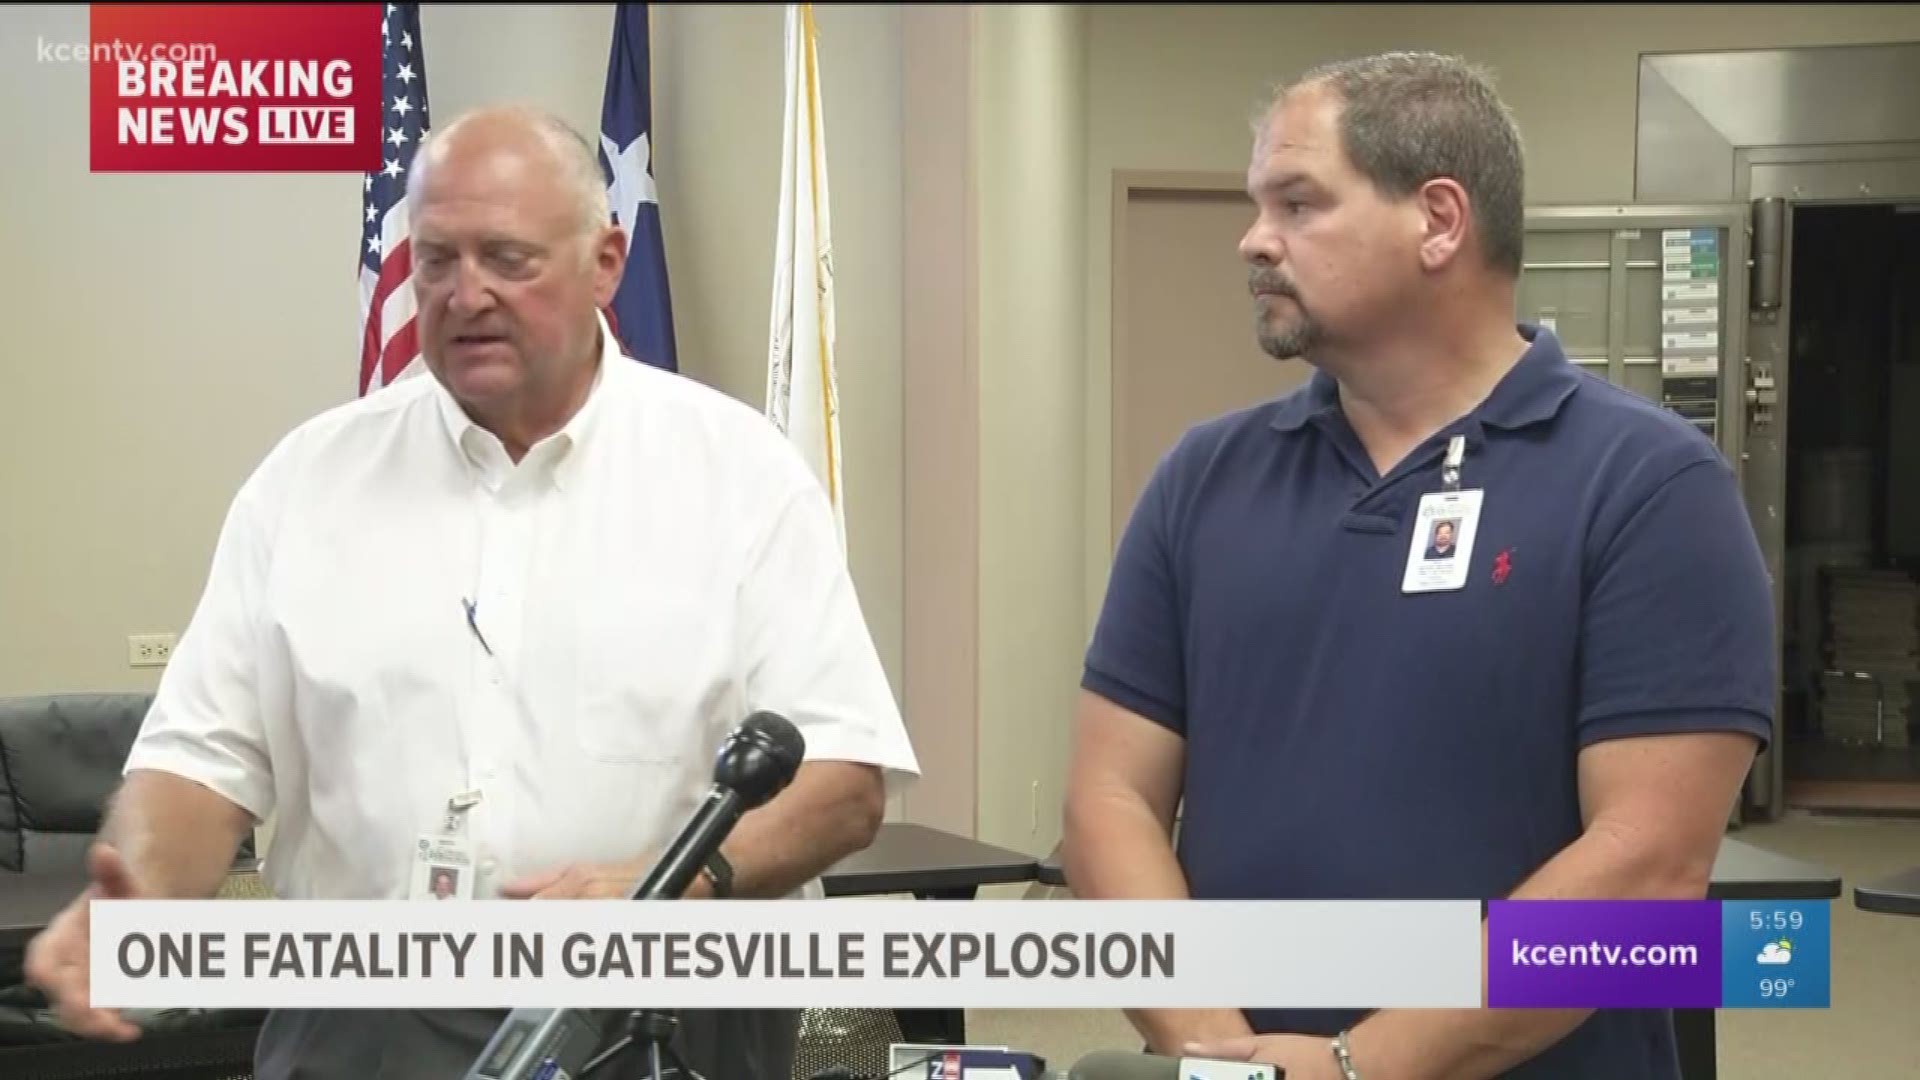 Hospital personnel described the explosion at Coryell Memorial Hospital as a 'tremendous blast.'